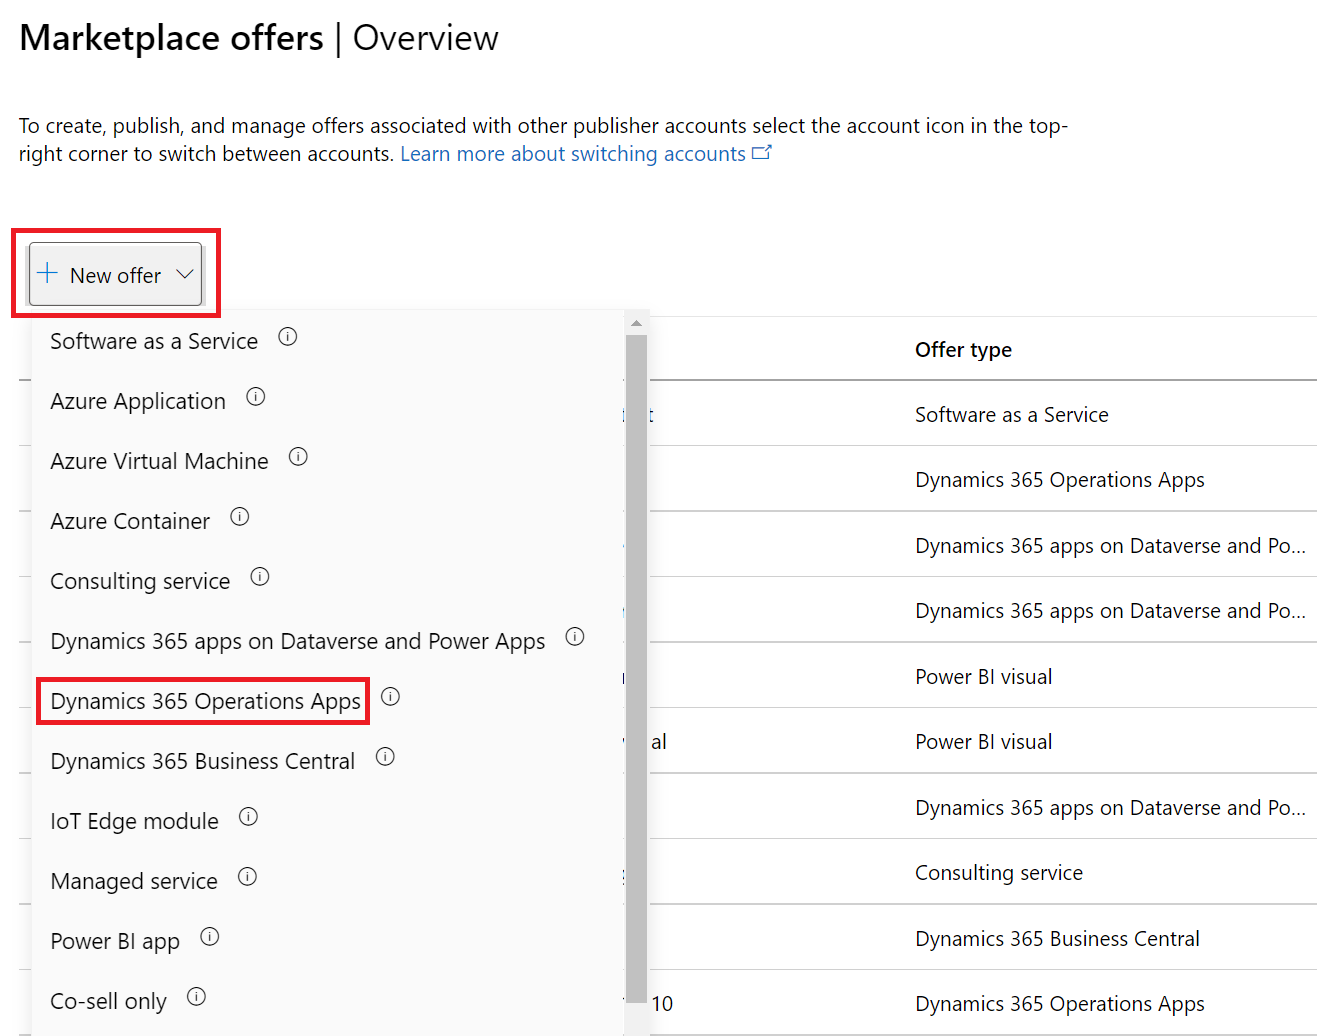 Screenshot of the 'New offer' button on the Marketplace offers page, highlighting the Dynamics 365 Operations Apps offer type.